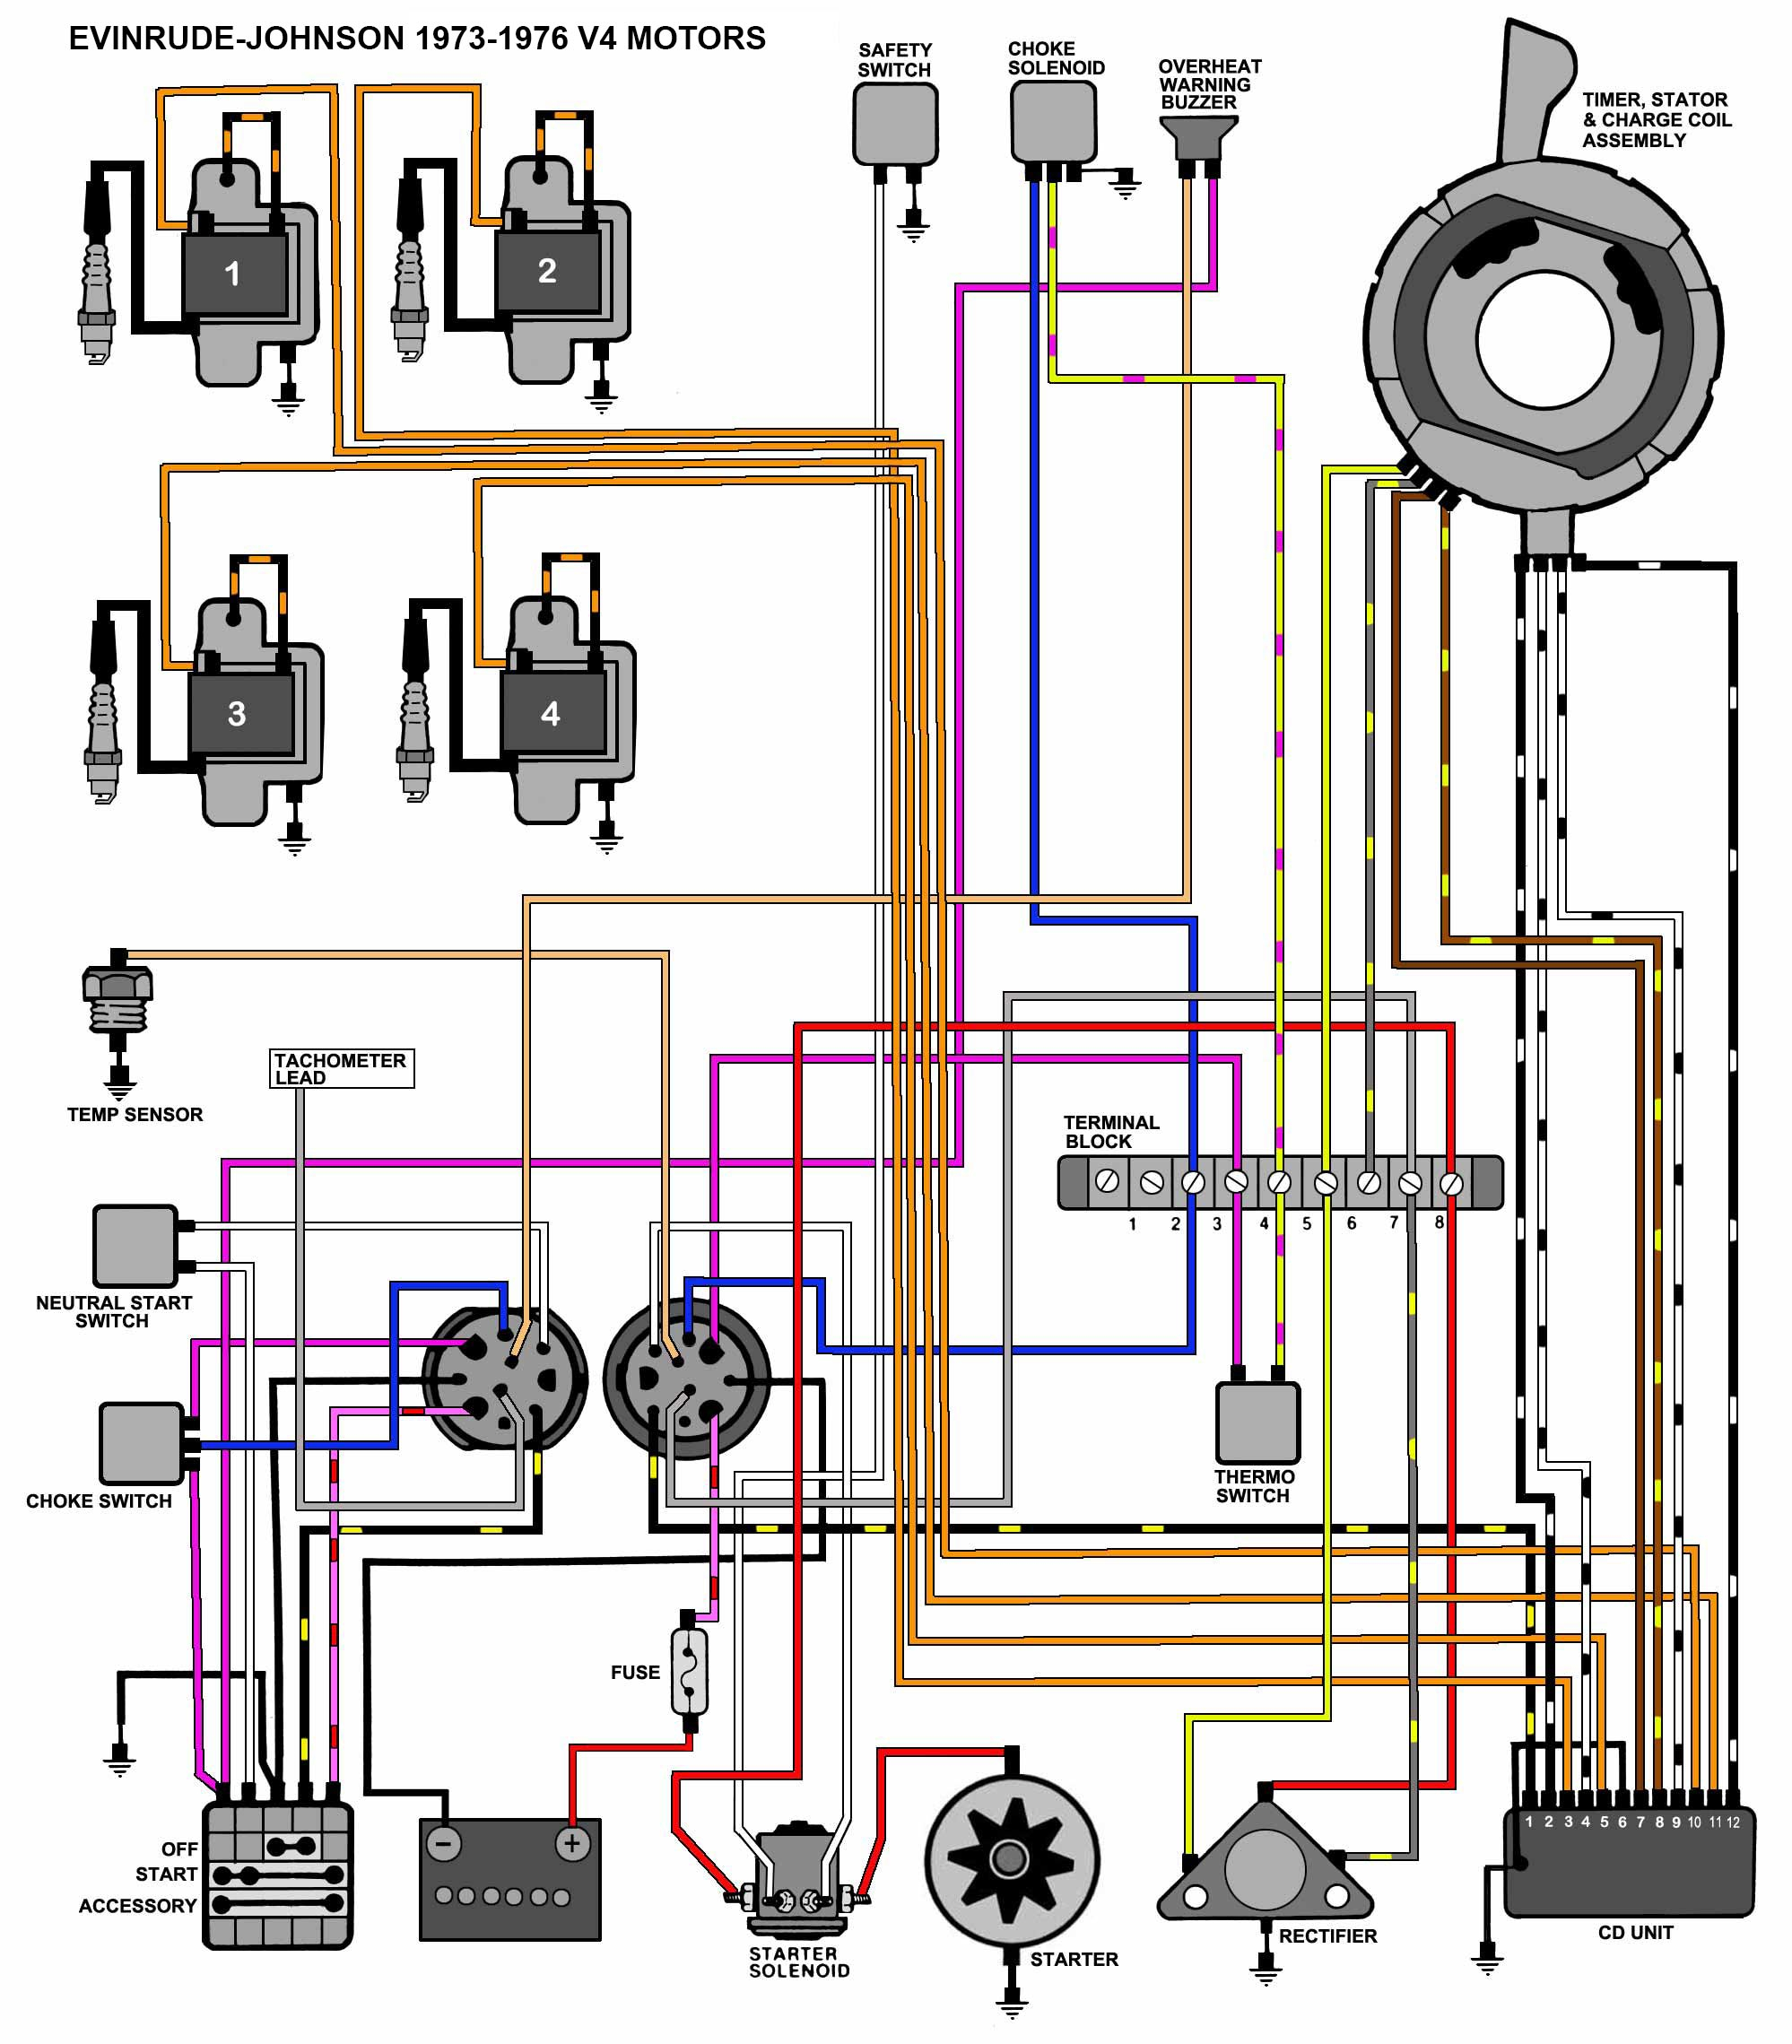 Evinrude Ignition Switch Wiring Diagram 1973 Evinrude Ignition Switch Wiring Diagram Wiring Diagram Web